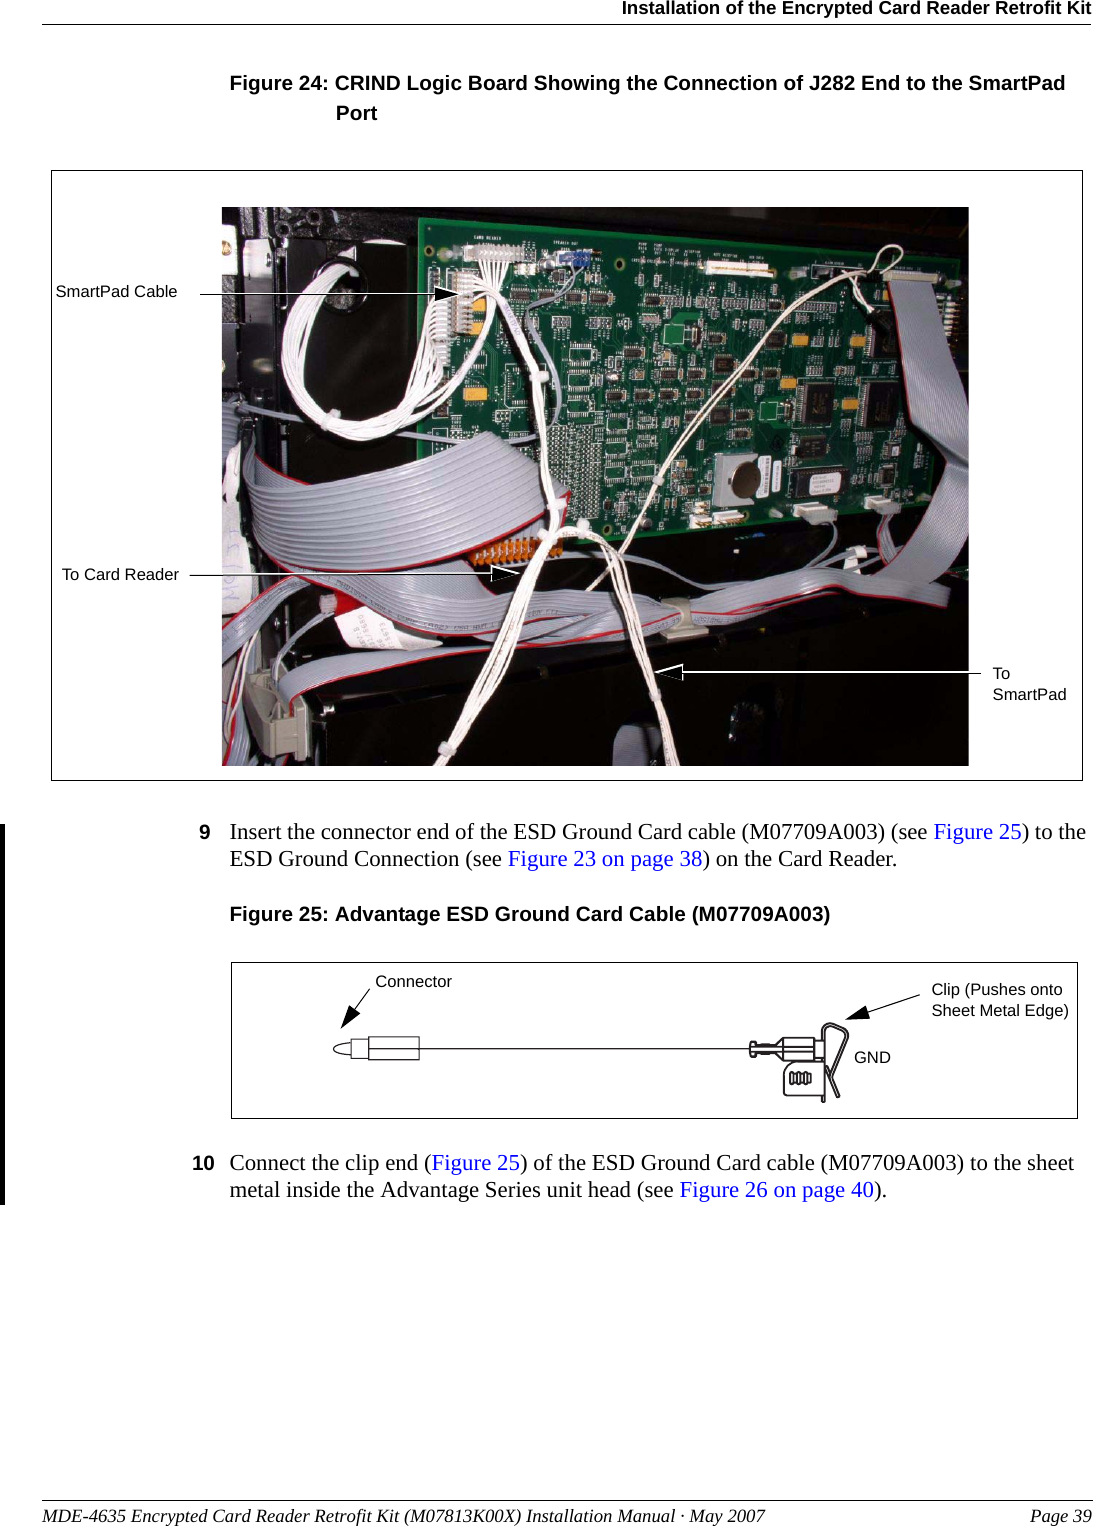 MDE-4635 Encrypted Card Reader Retrofit Kit (M07813K00X) Installation Manual · May 2007 Page 39Installation of the Encrypted Card Reader Retrofit KitPreliminaryFigure 24: CRIND Logic Board Showing the Connection of J282 End to the SmartPad PortSmartPad CableTo Card ReaderTo SmartPad9Insert the connector end of the ESD Ground Card cable (M07709A003) (see Figure 25) to the ESD Ground Connection (see Figure 23 on page 38) on the Card Reader.Figure 25: Advantage ESD Ground Card Cable (M07709A003)ConnectorGNDClip (Pushes onto Sheet Metal Edge)10 Connect the clip end (Figure 25) of the ESD Ground Card cable (M07709A003) to the sheet metal inside the Advantage Series unit head (see Figure 26 on page 40).